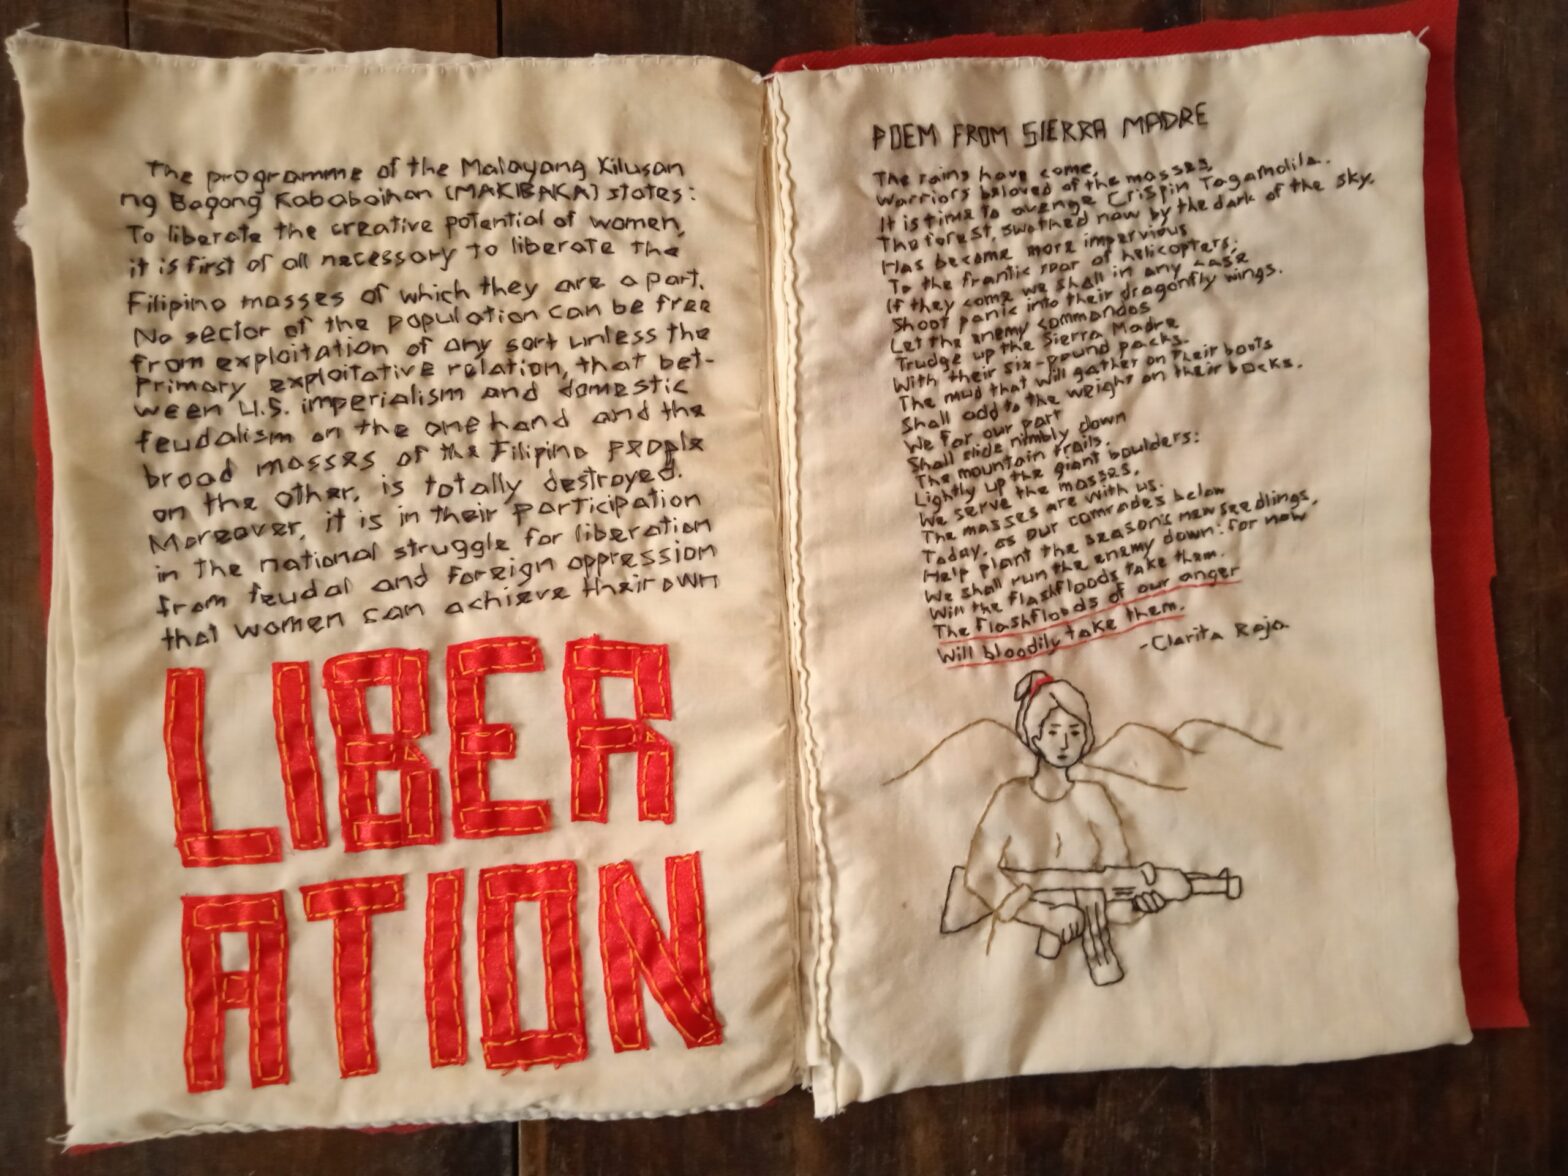 Sewing Dissent: Making Cloth Books During COVID-19